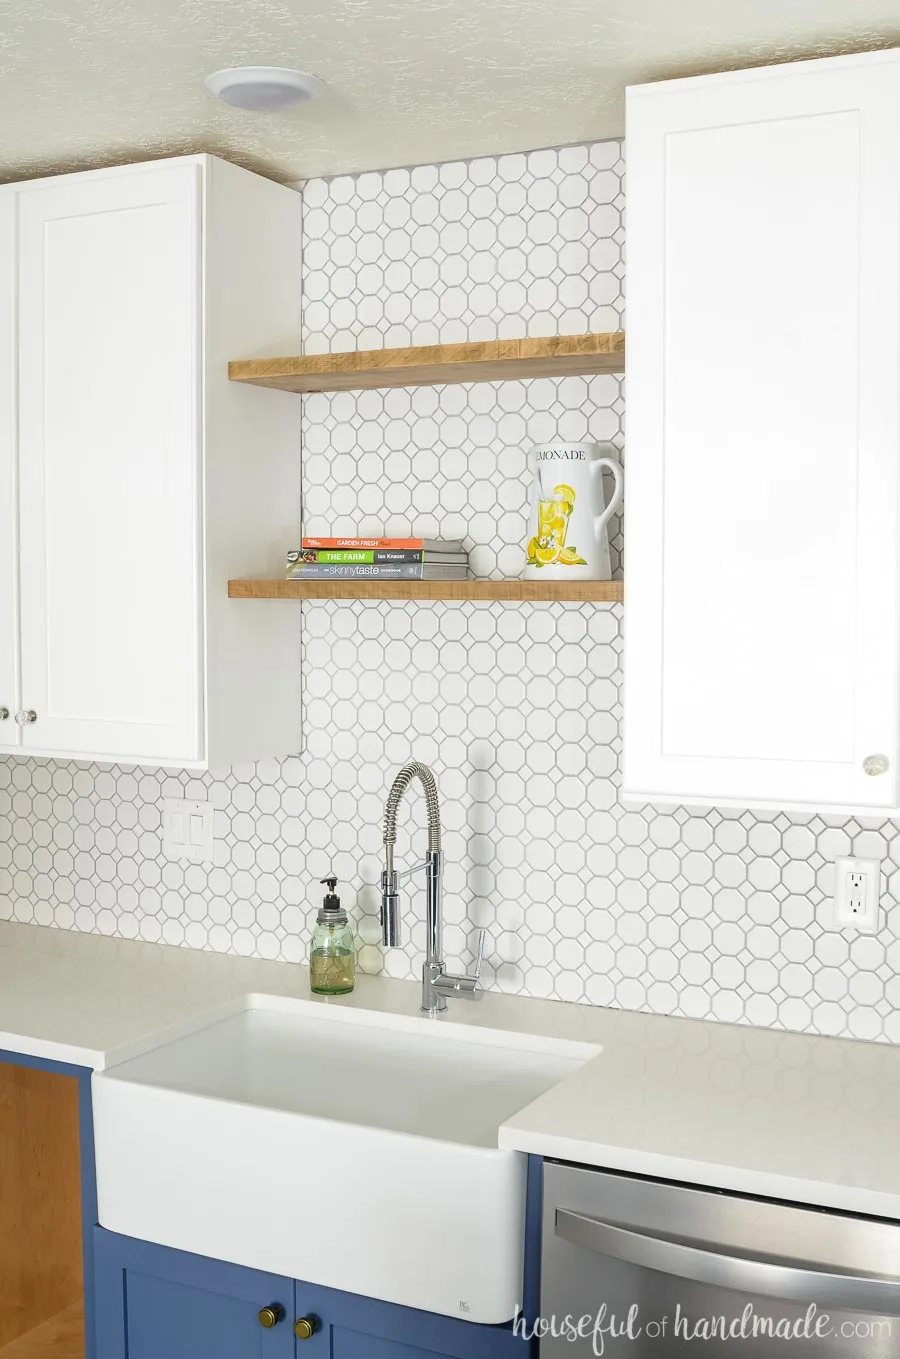 A farmhouse sink gives you so much space in your kitchen. Housefulofhandmade.com